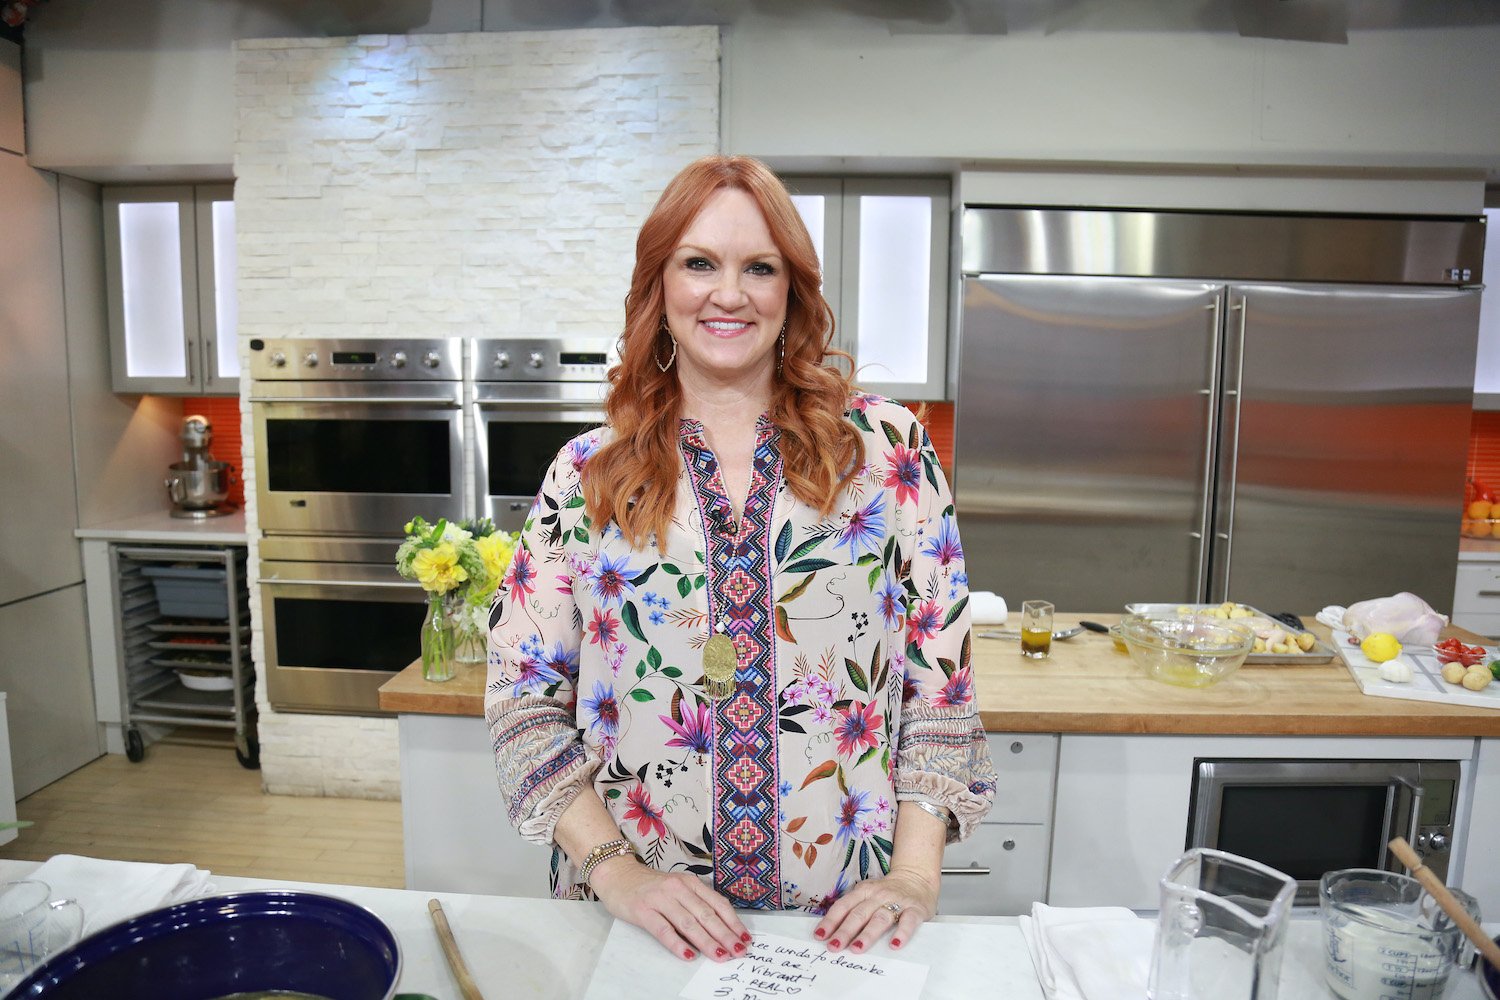 'The Pioneer Woman' Ree Drummond poses in a bright colored shirt during a cooking segment on the Today show in 2019.